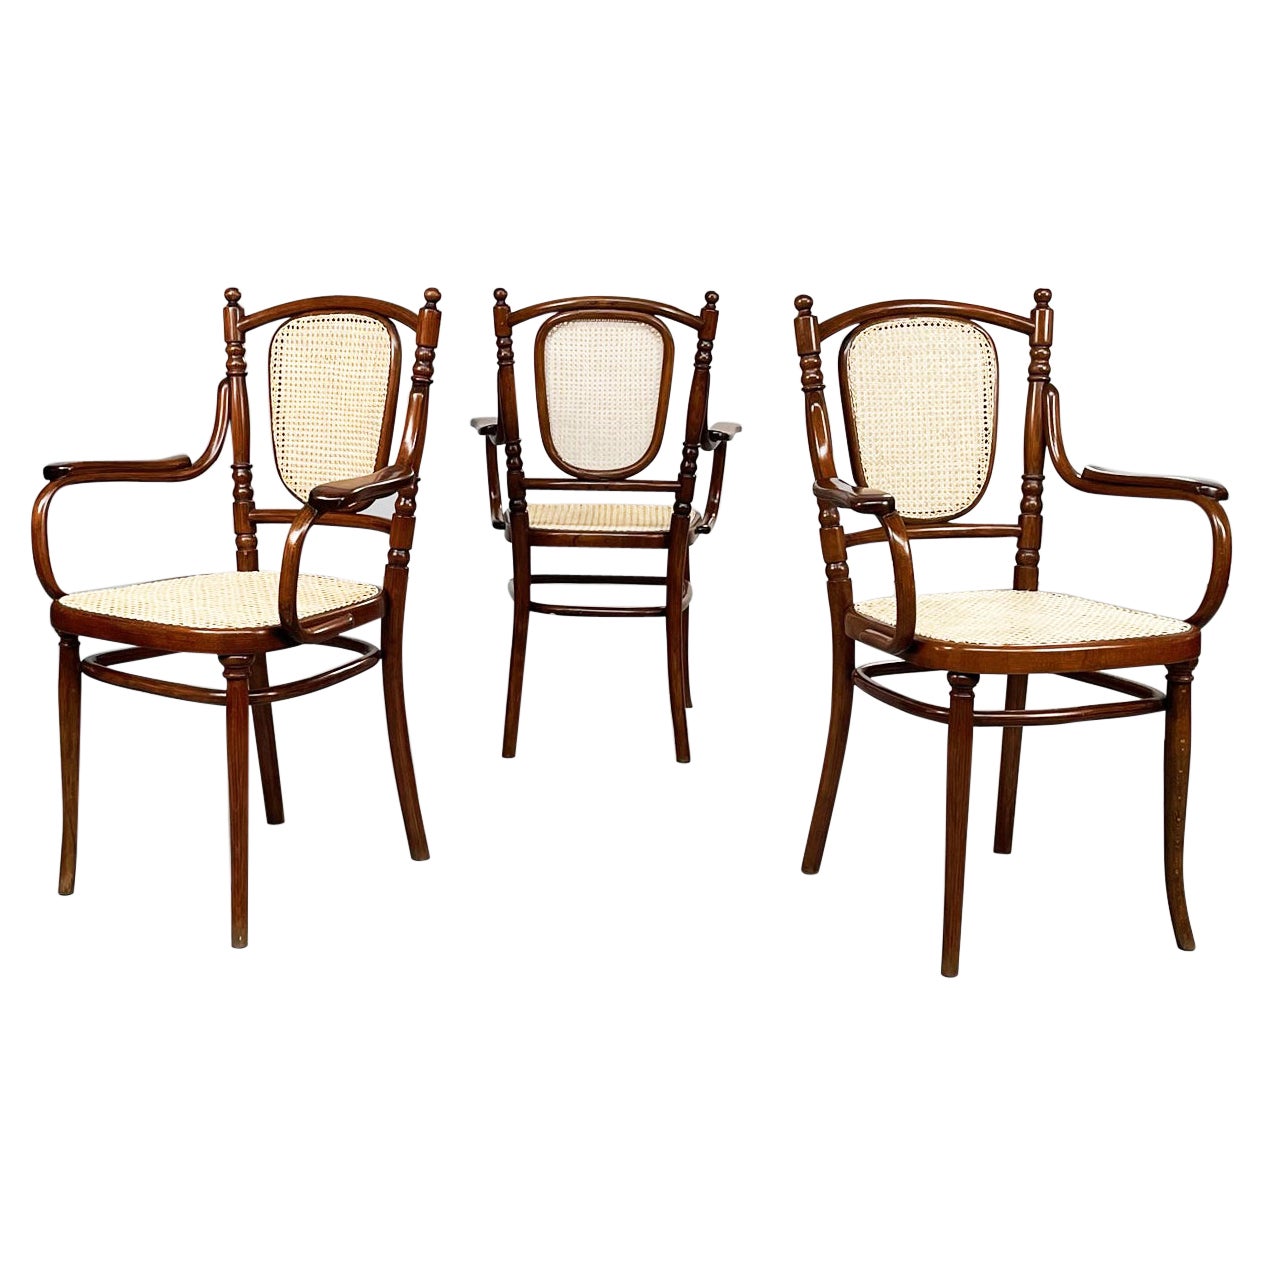 Austrian Chairs with Straw and Wood by Thonet, 1900s For Sale